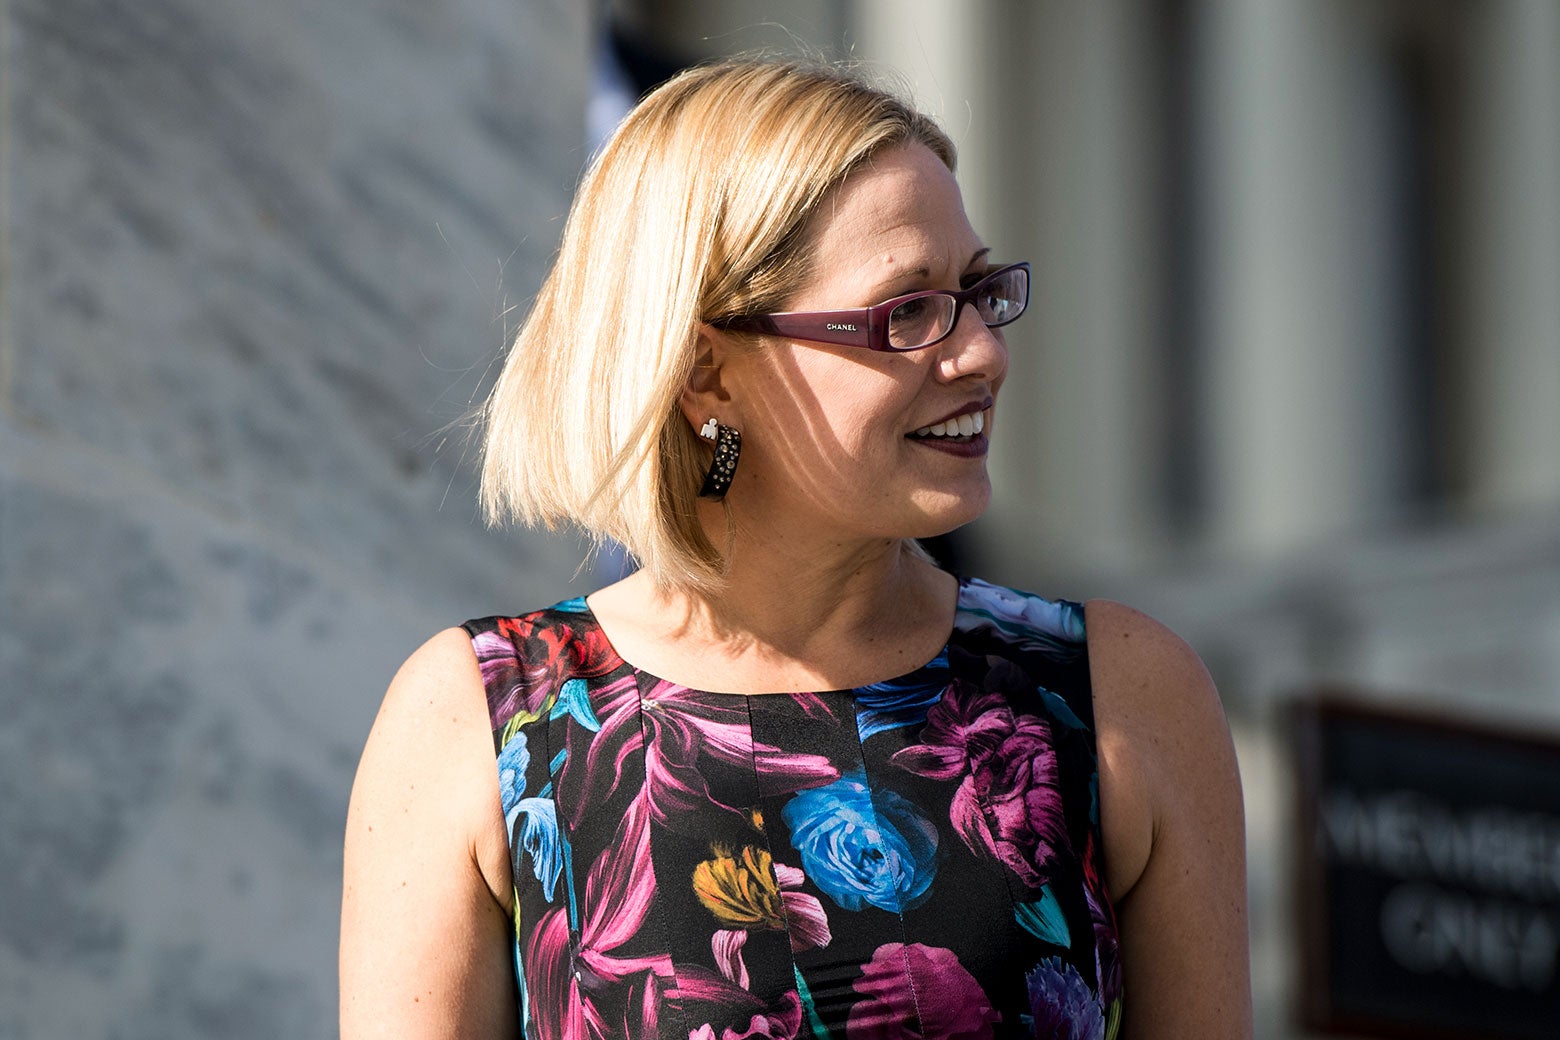 Kyrsten Sinema on the House steps wearing a multicolored floral sleeveless dress, a pair of chunky Chanel glasses, and glittery hoop earrings.